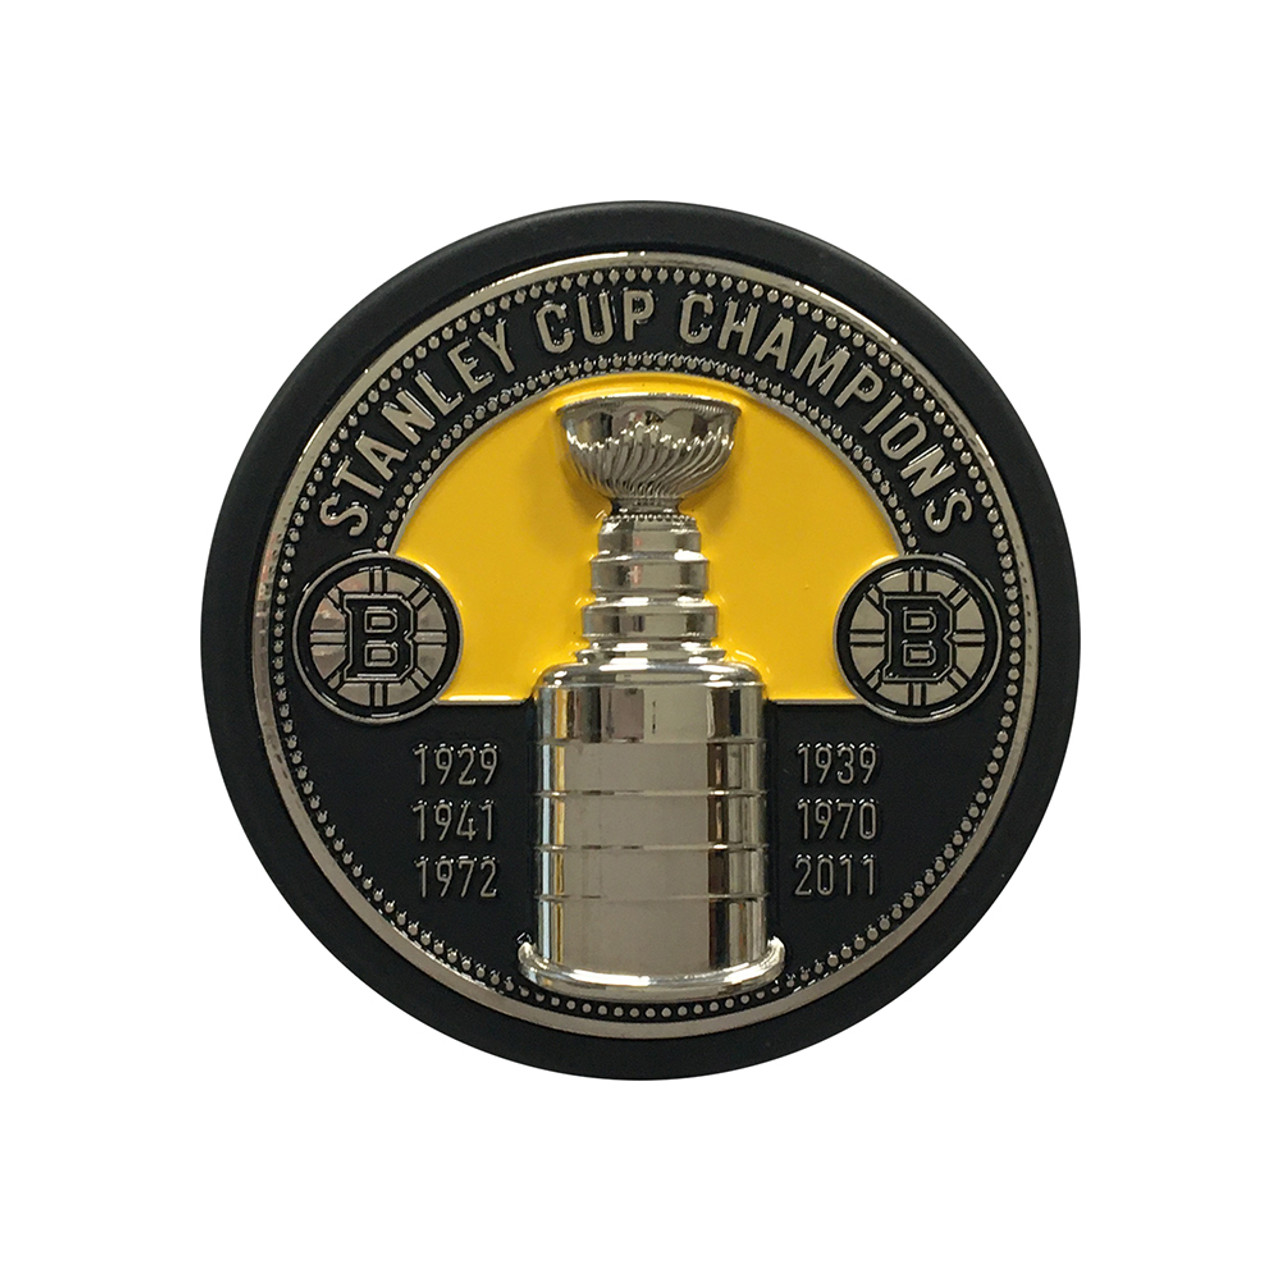 Boston Bruins 6x Stanley Cup Champions 12x6 Metal License Plate